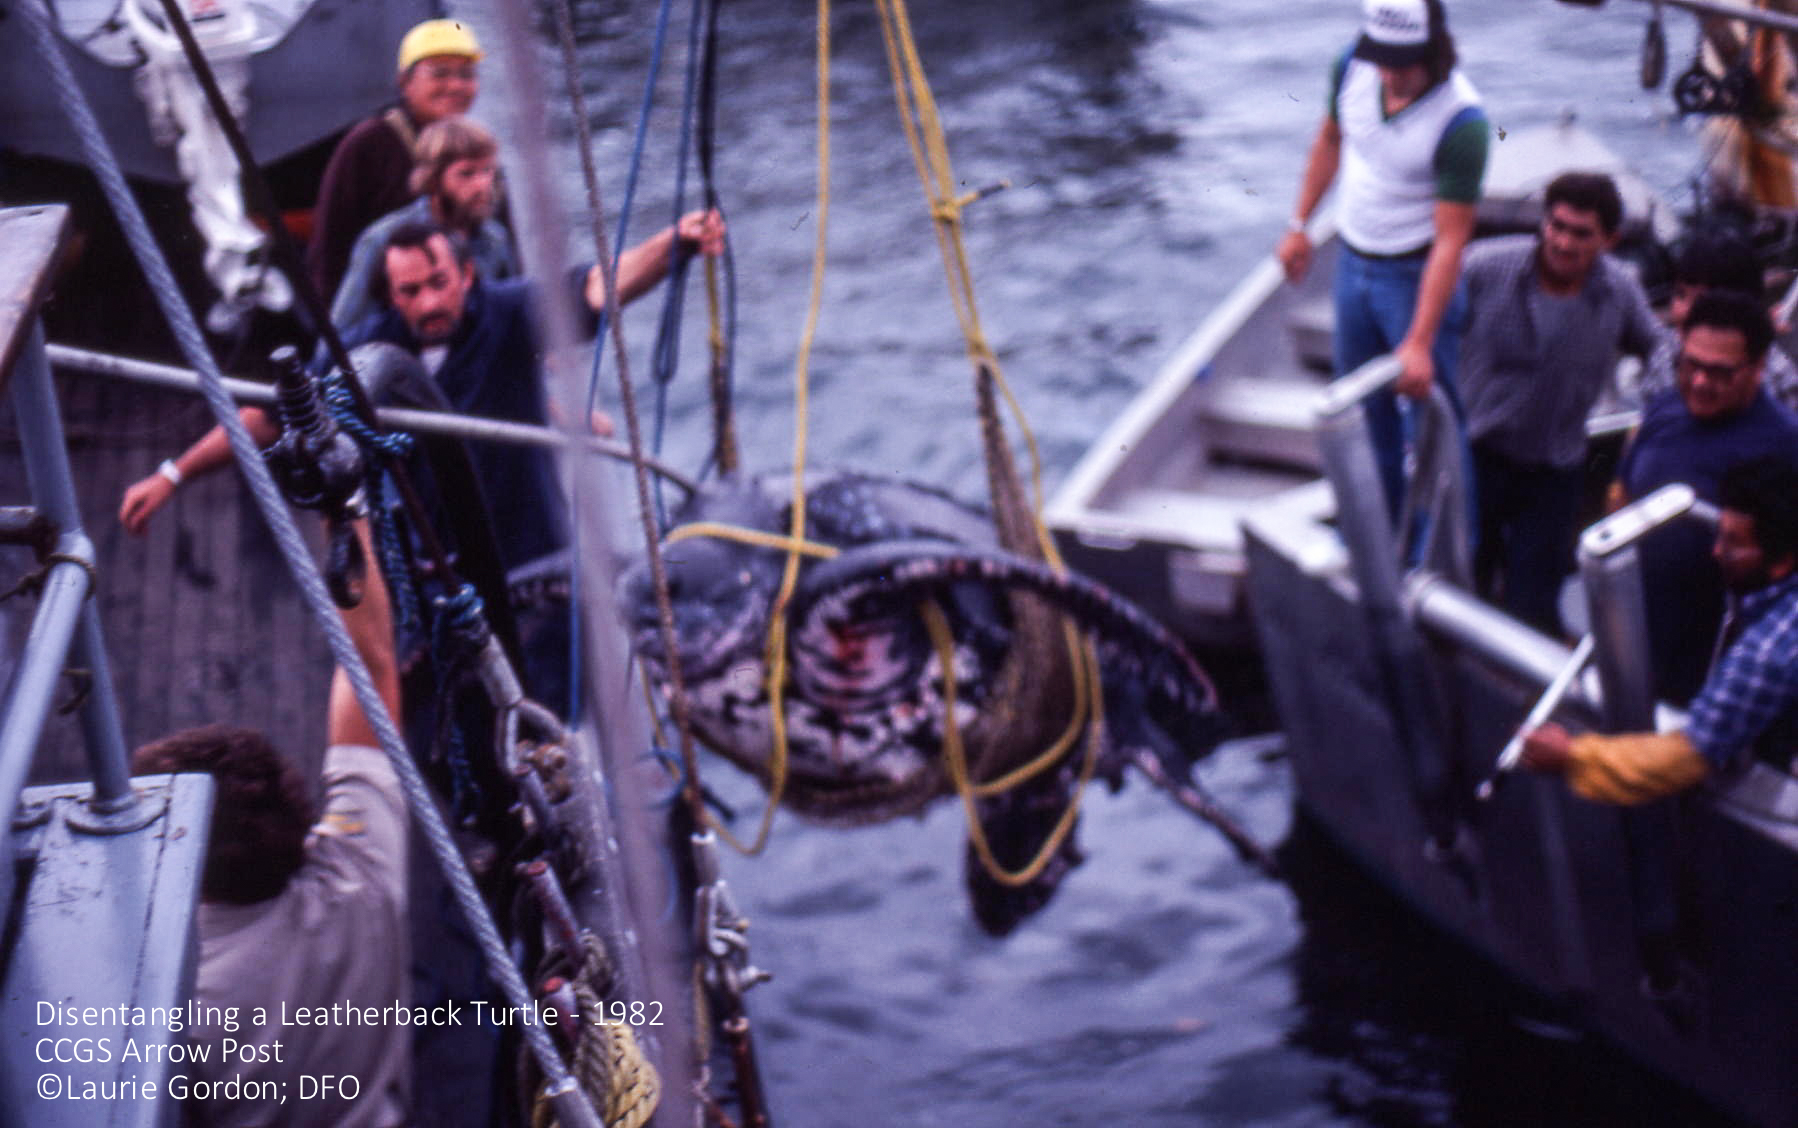 Leatherback being saved from entanglement by Canada's Coast Guard in 1982 (Arrow Post). Photo: ©Laurie Gordon, DFO. Click to enlarge. 